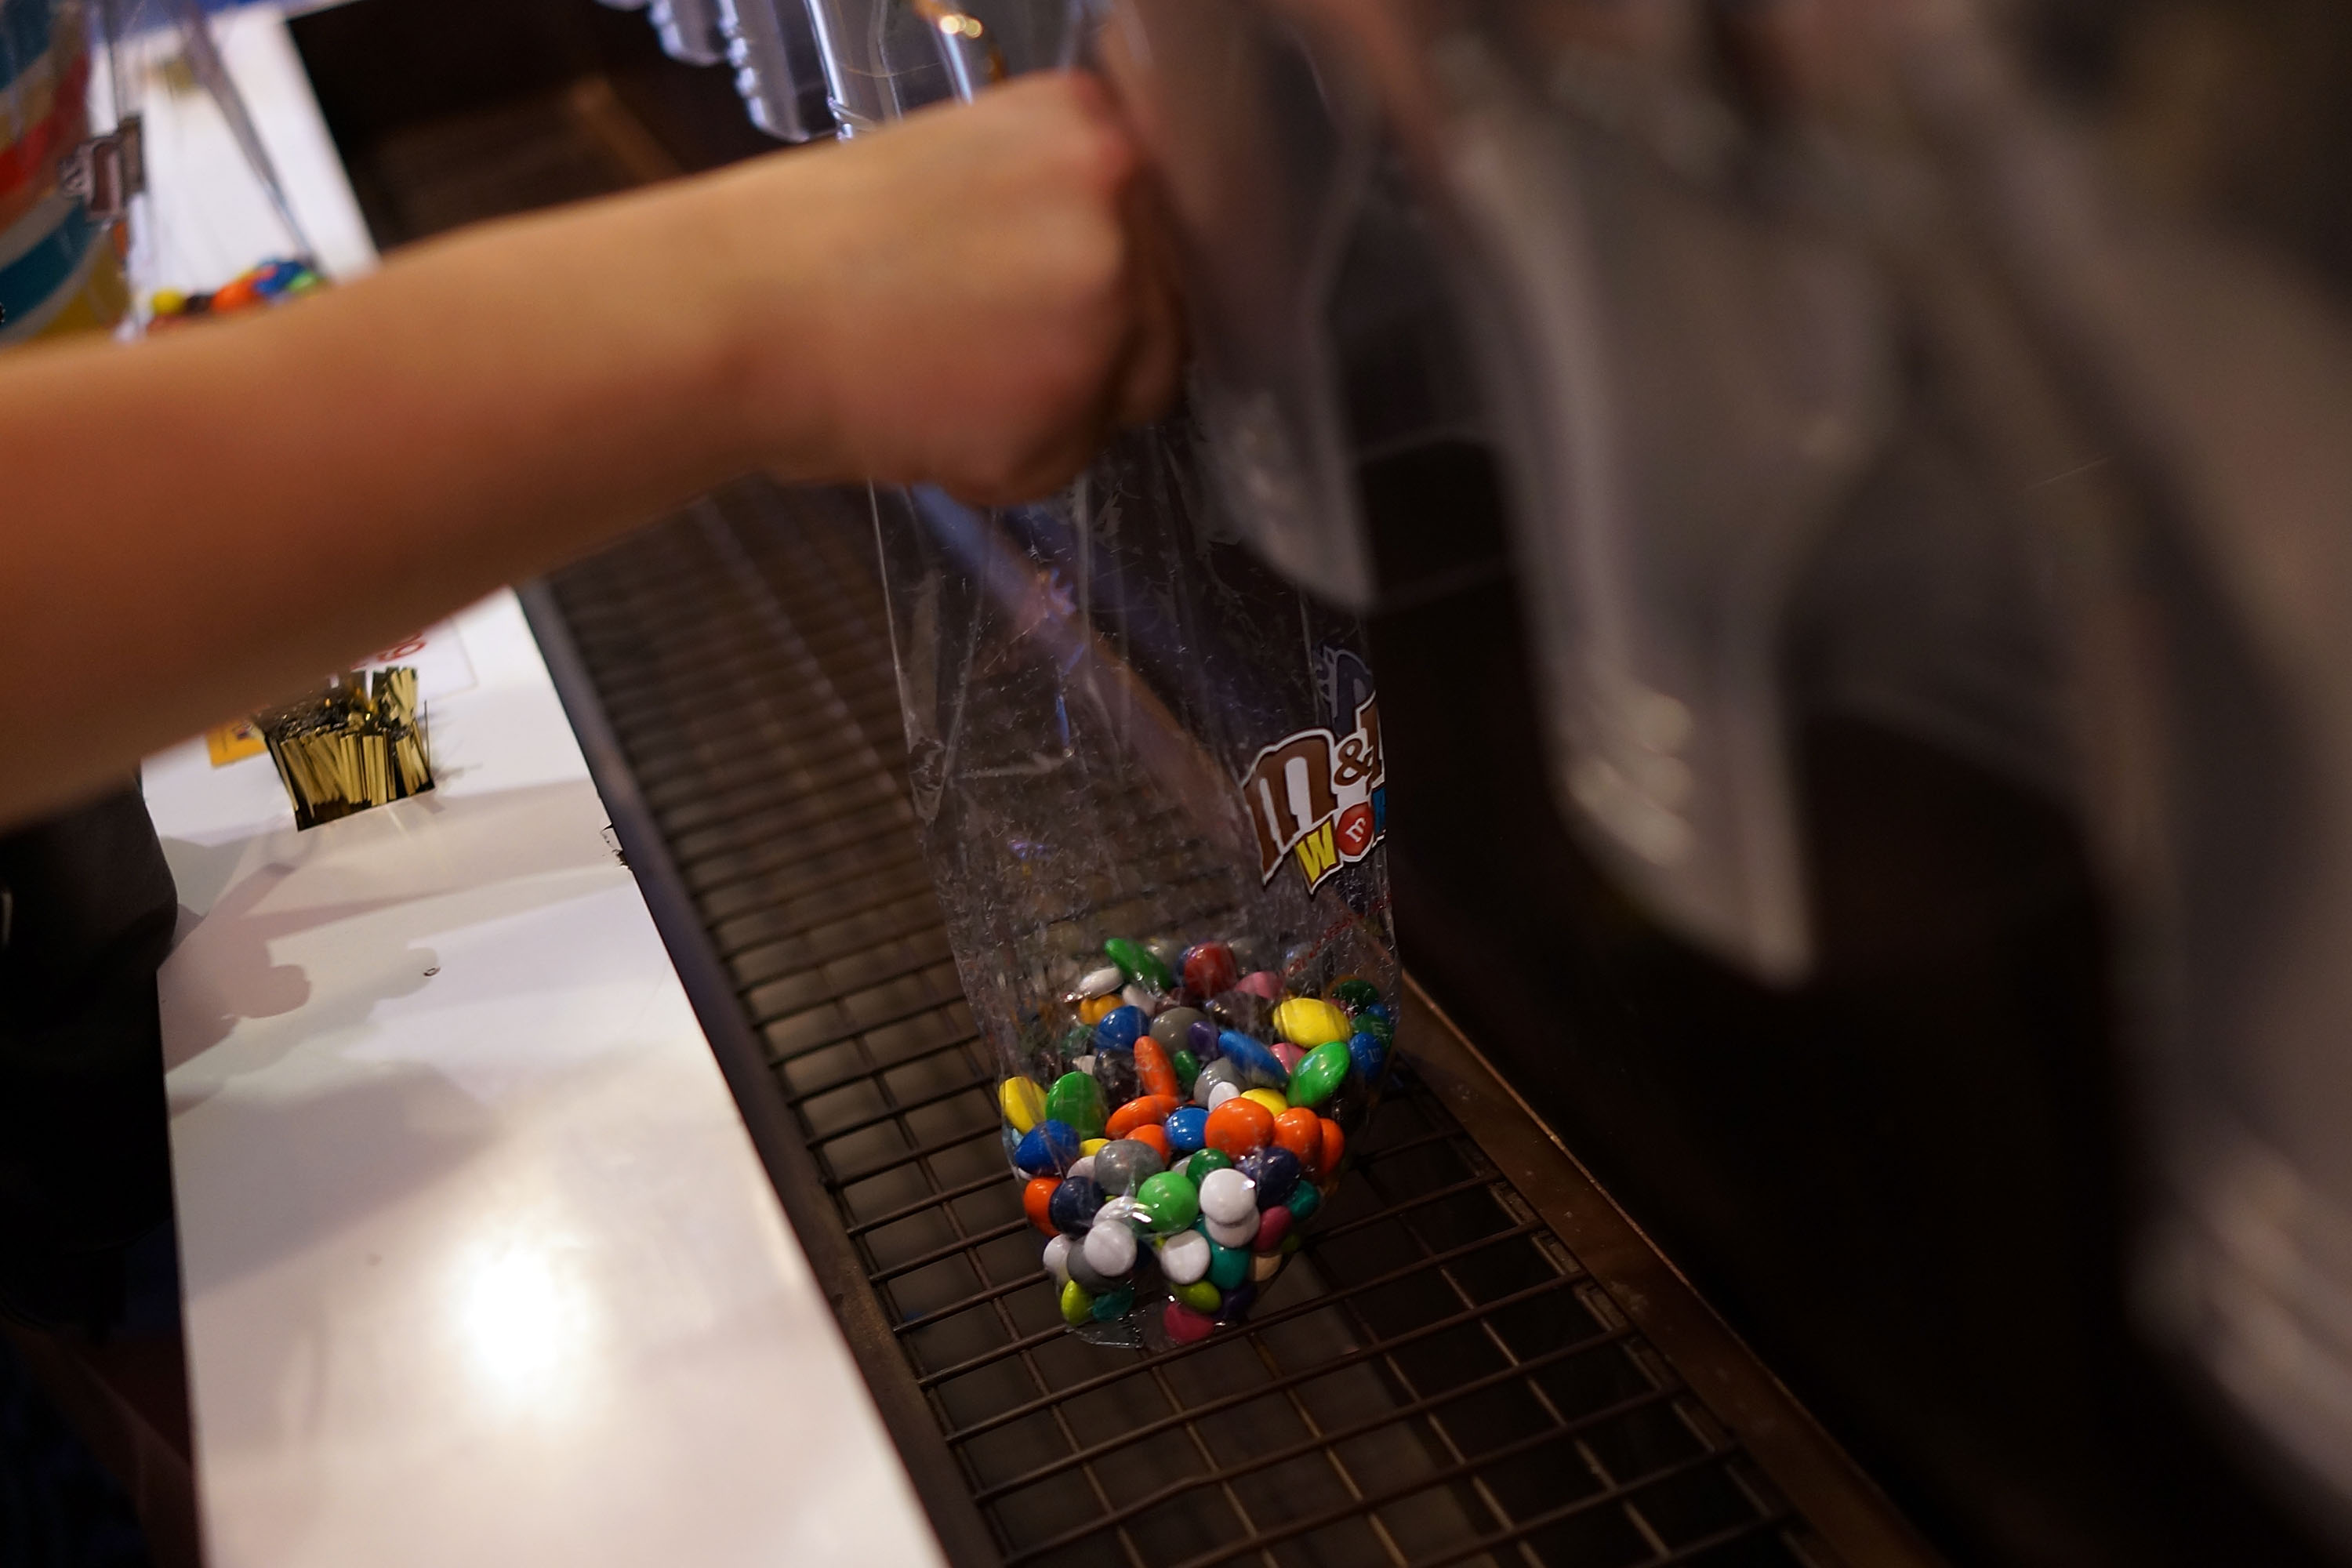 People fill up bags of M&amp;M's at the M&amp;M store in Times Square in New York City on July 24, 2014. (Spencer Platt—Getty Images)